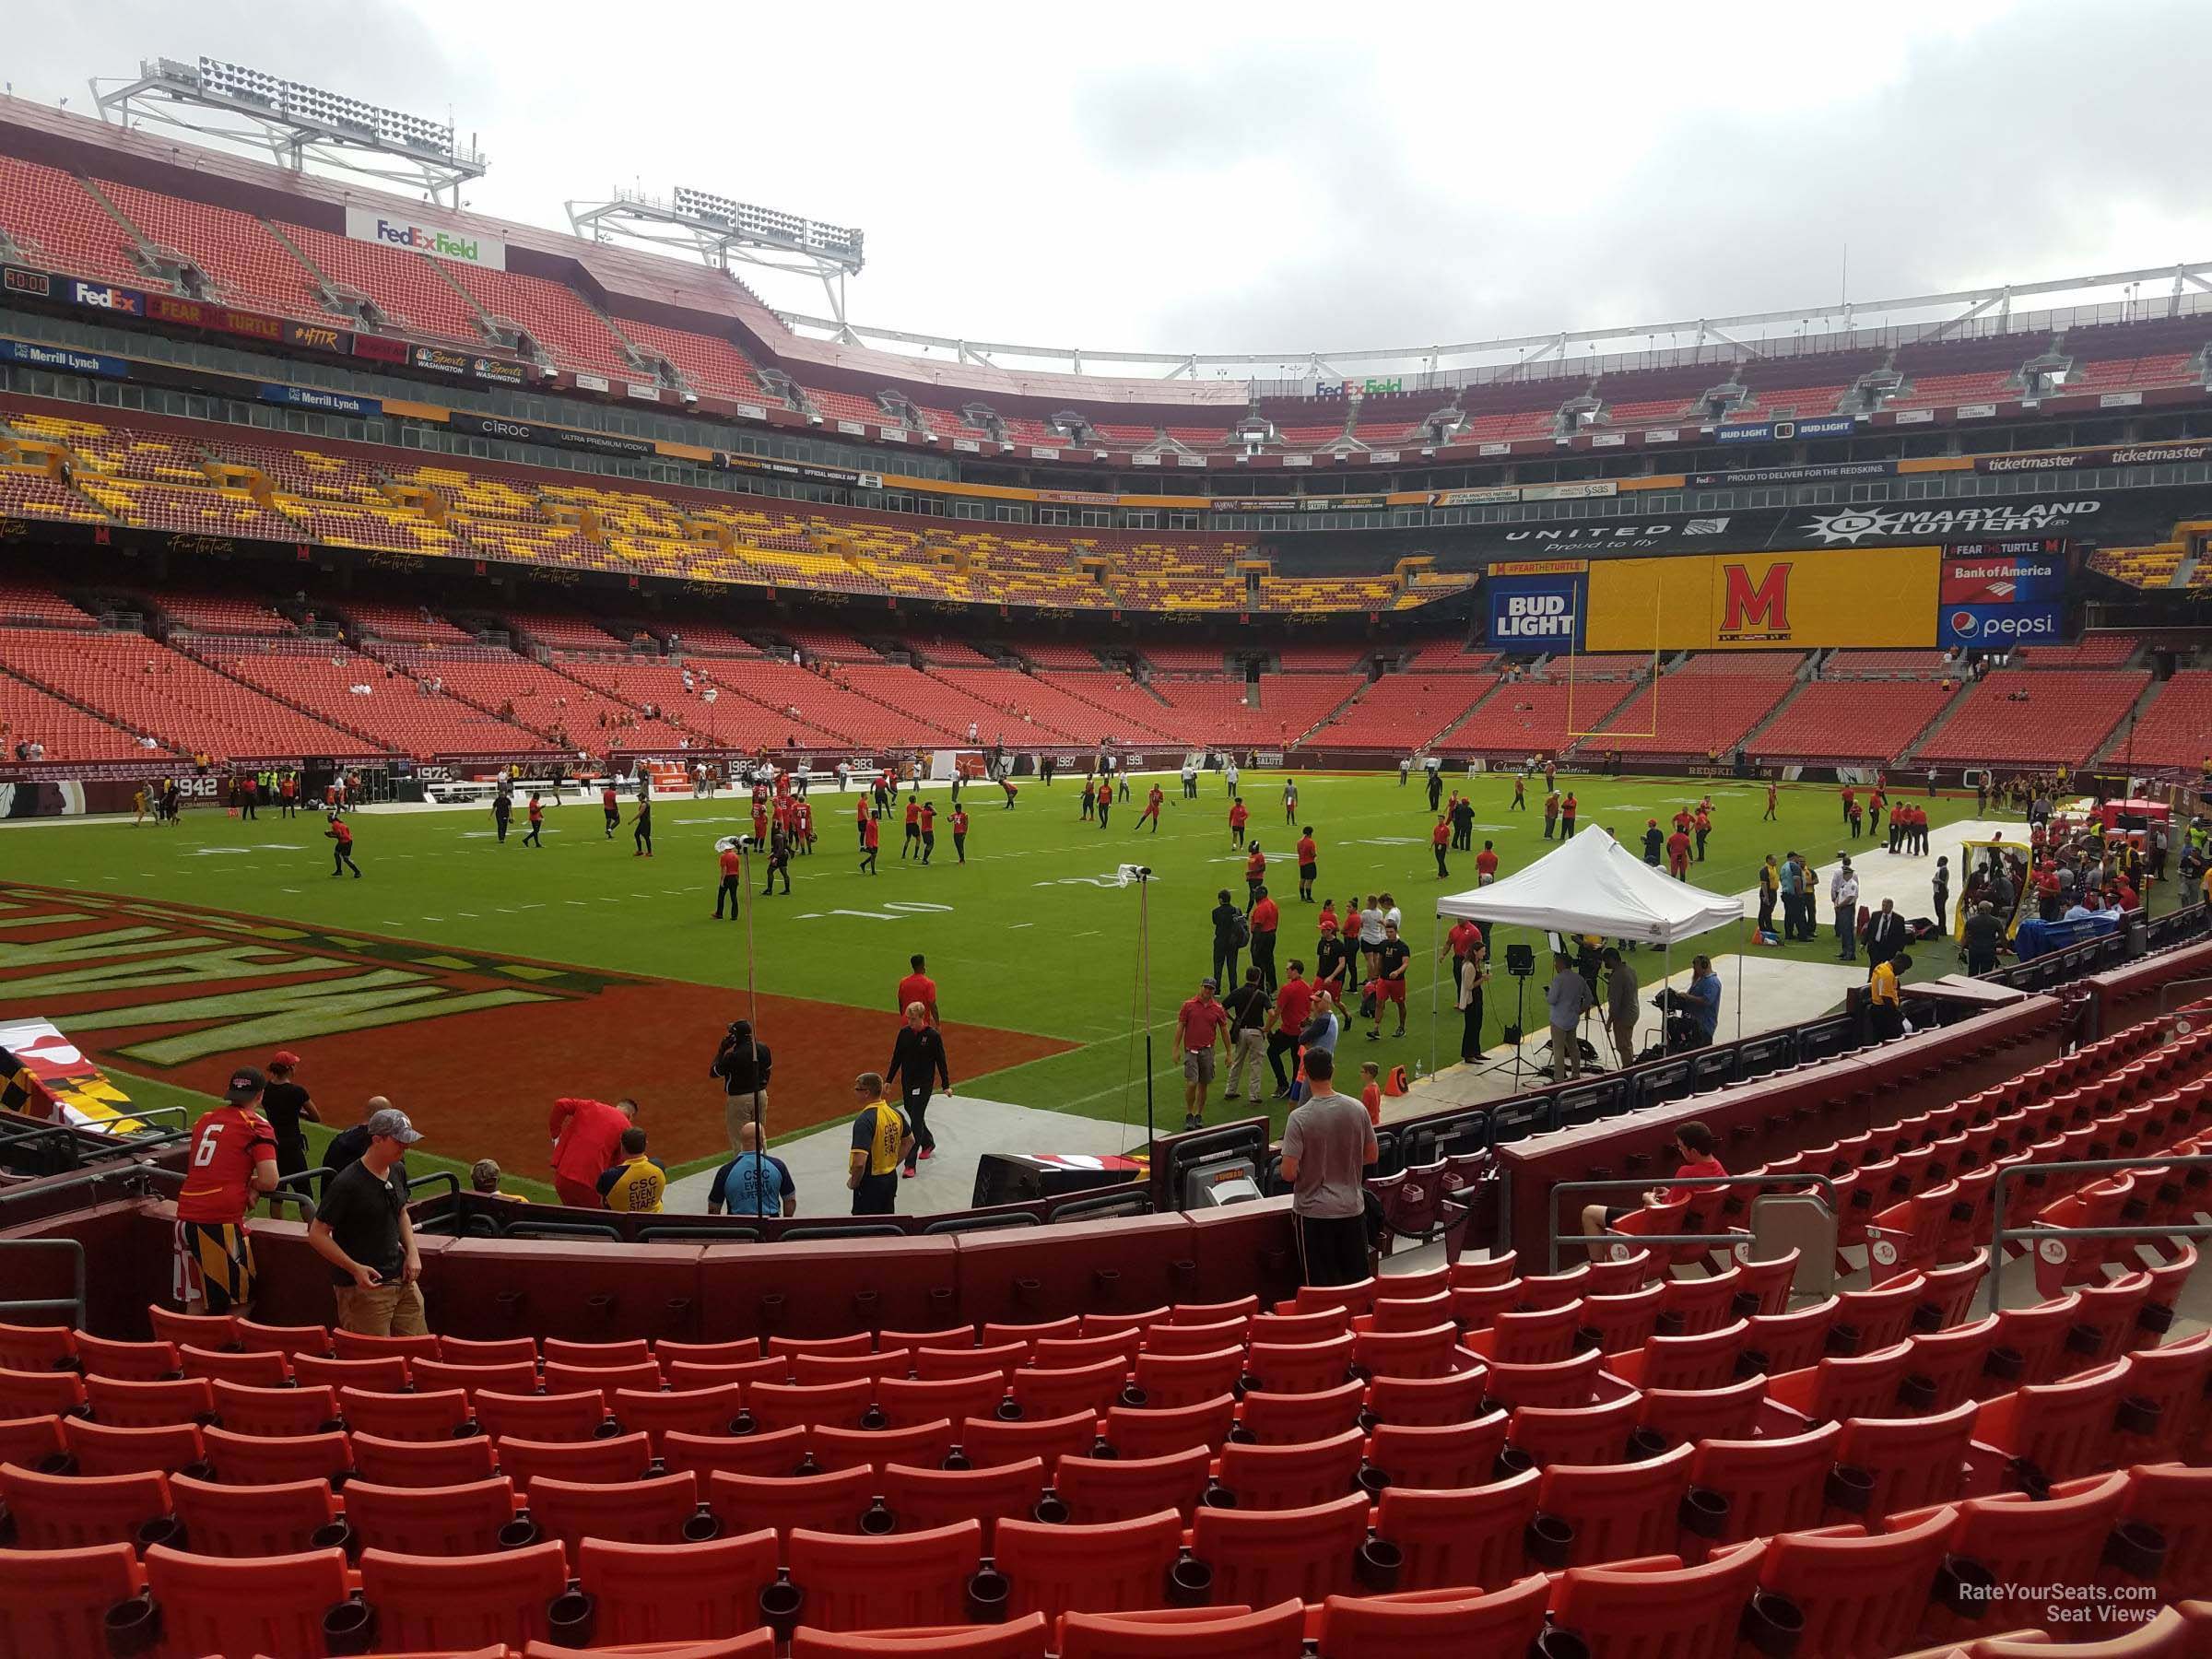 section 106, row 13 seat view  - fedexfield